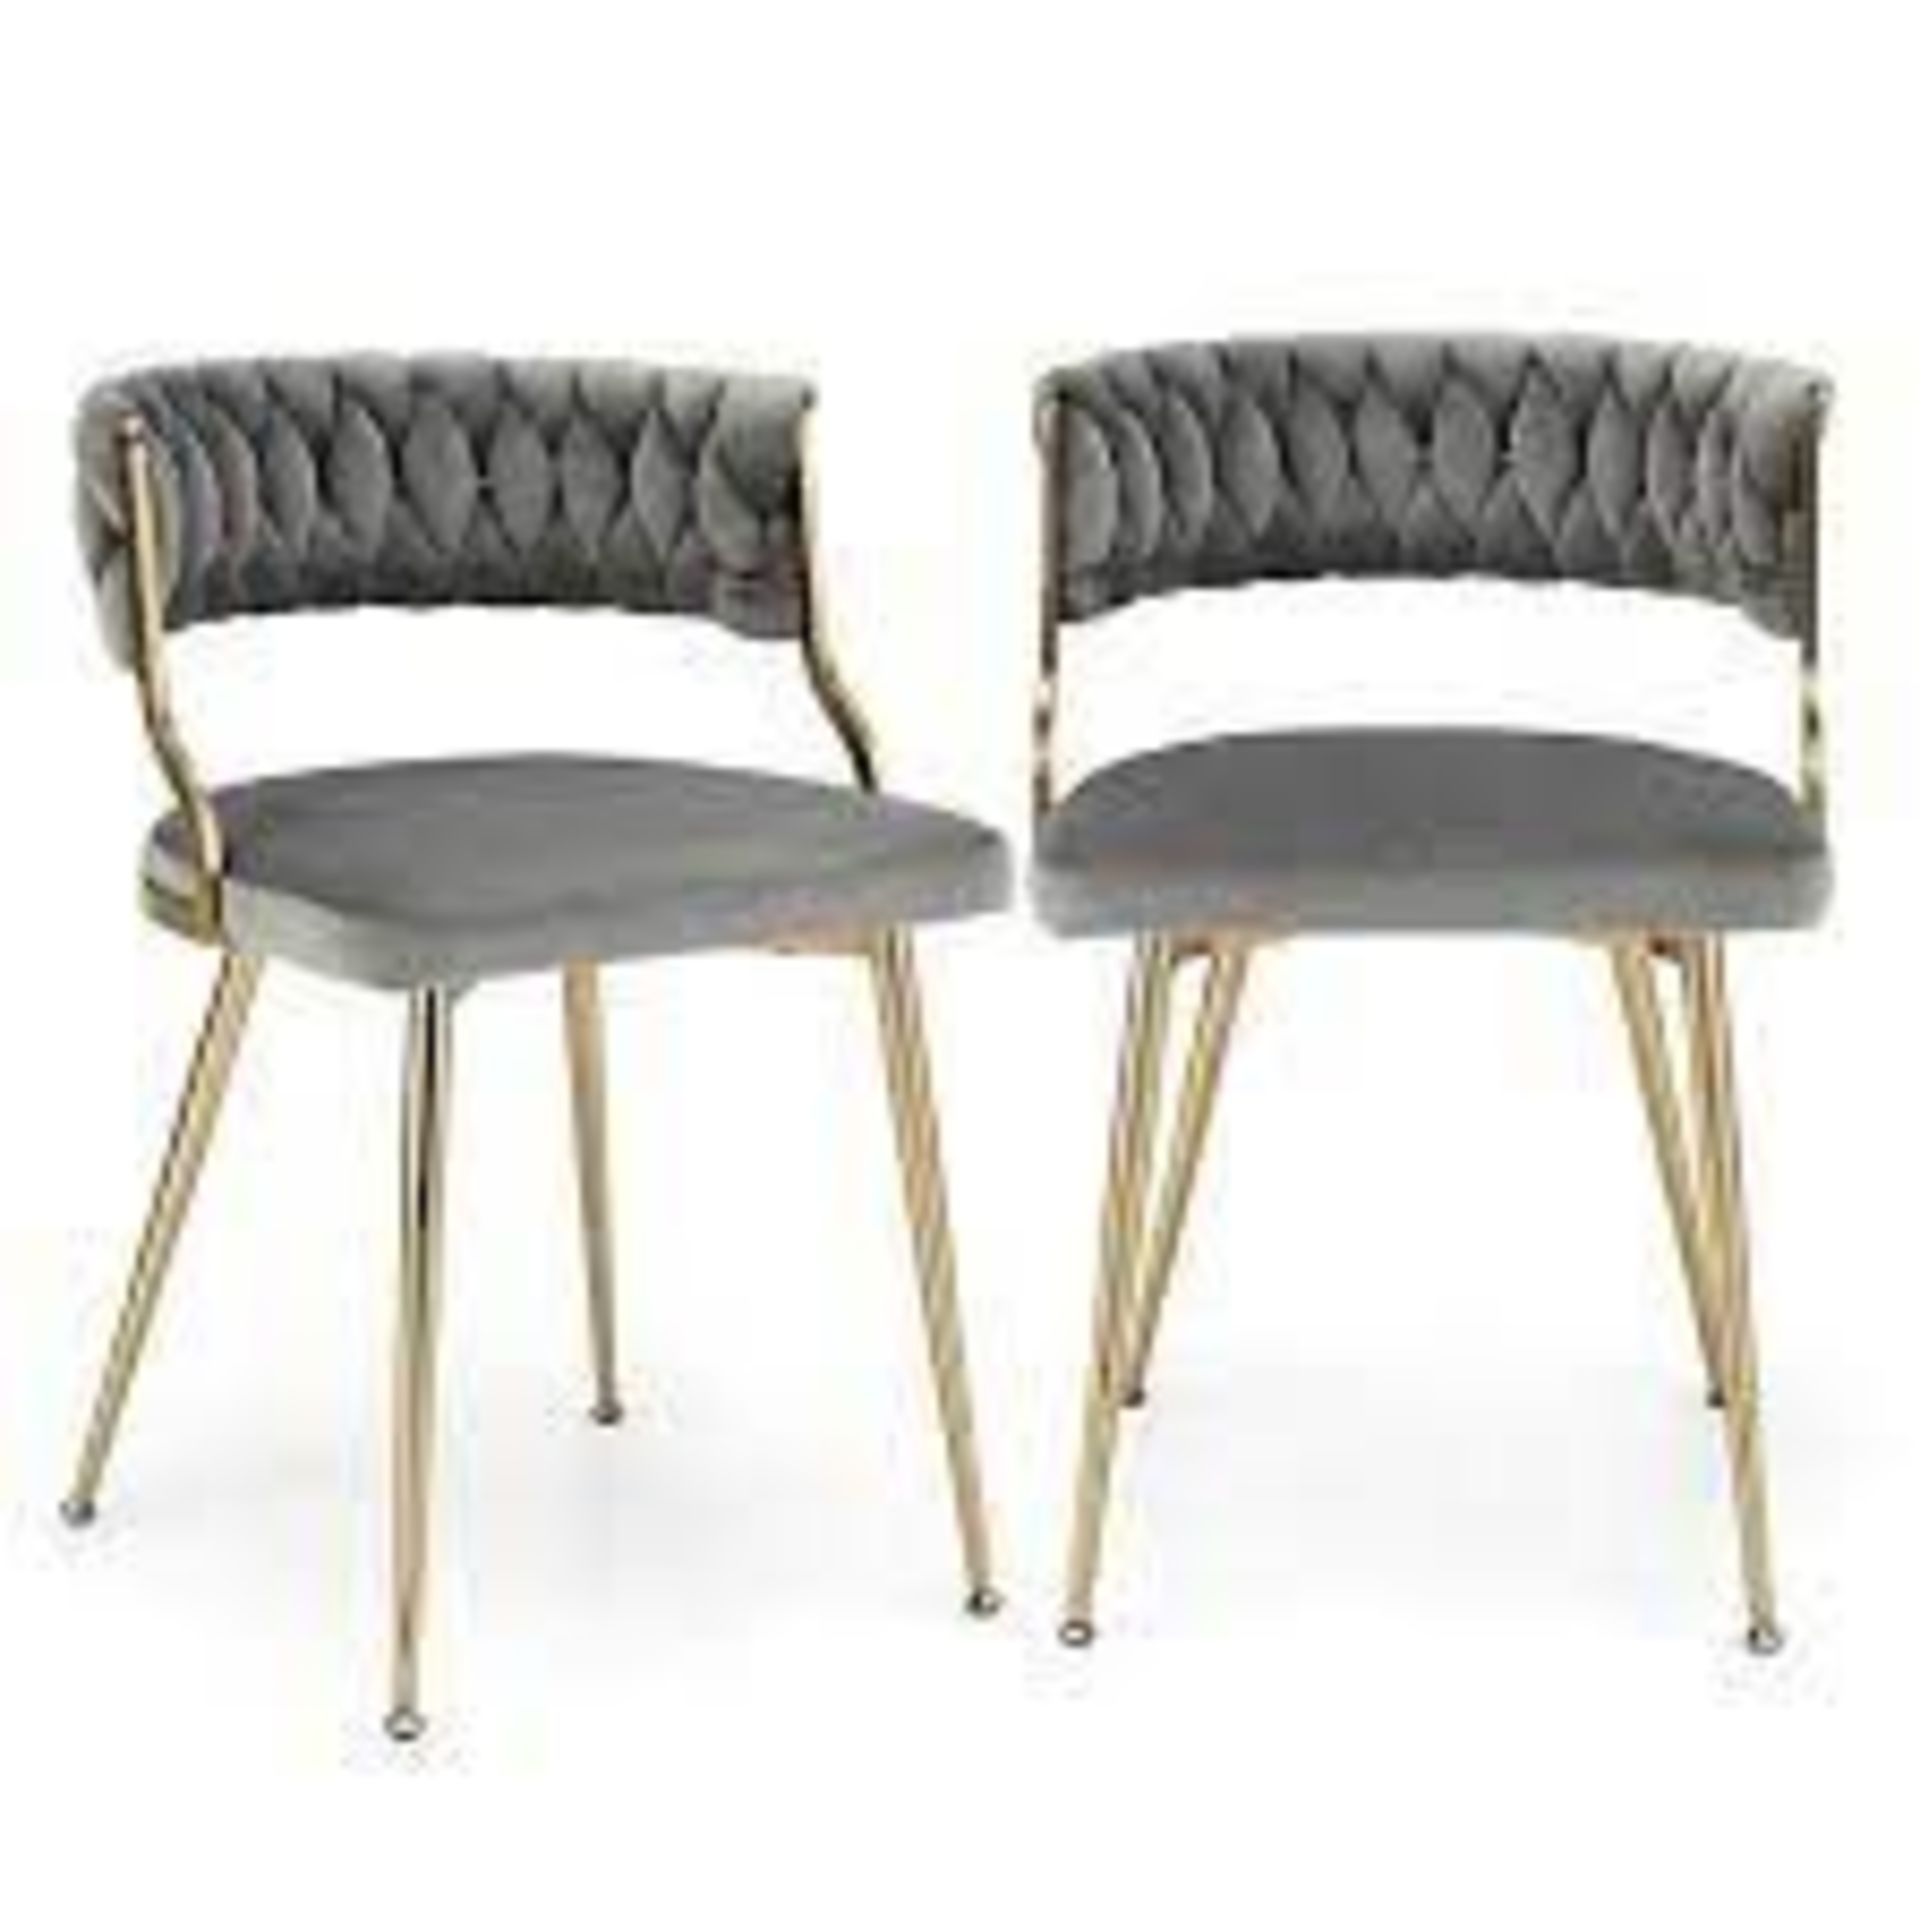 Velvet Dining Chairs Set of 2 with Upholstered Backs. -R14.5. Do you want to find accent chairs to